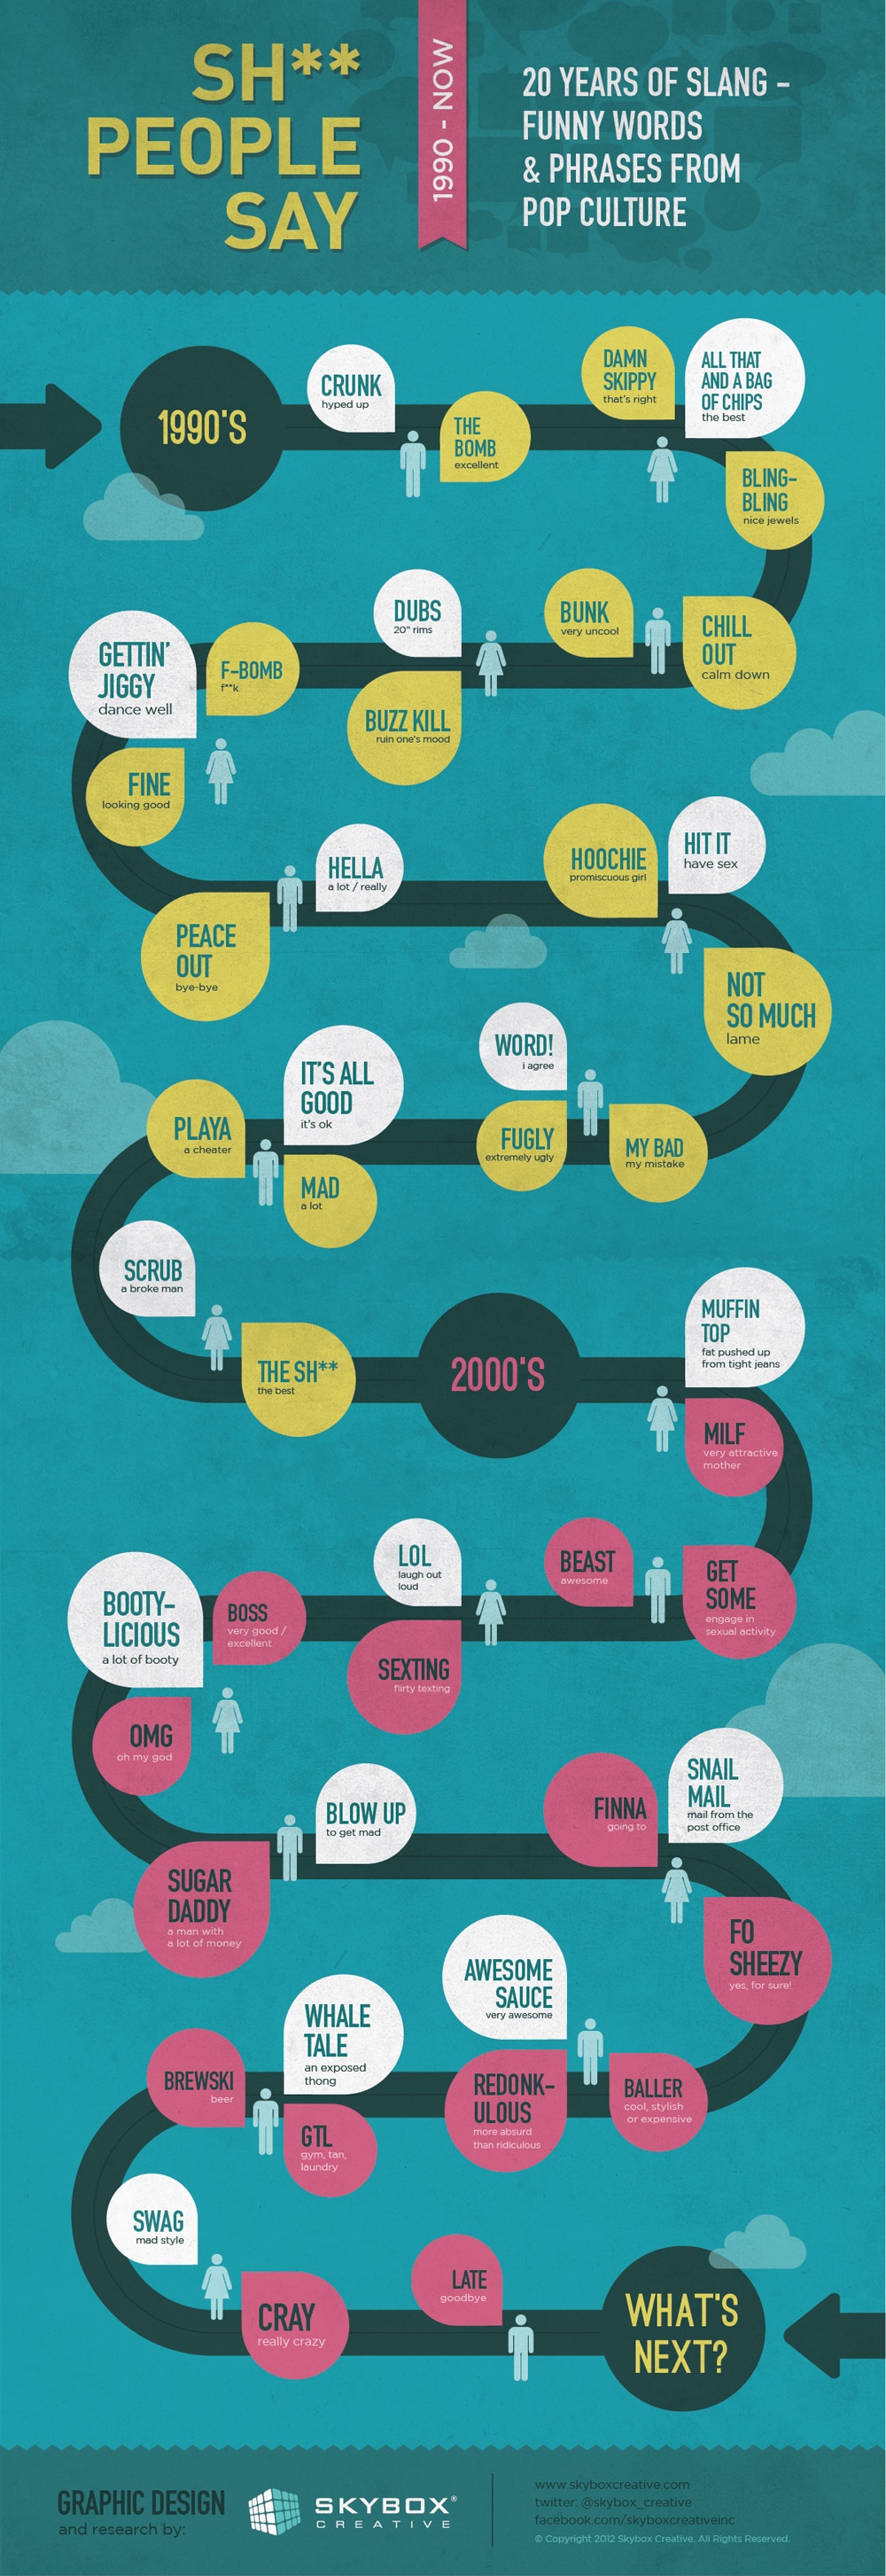 Shit People Say: Slang From The 1990s Until Today [Infographic]